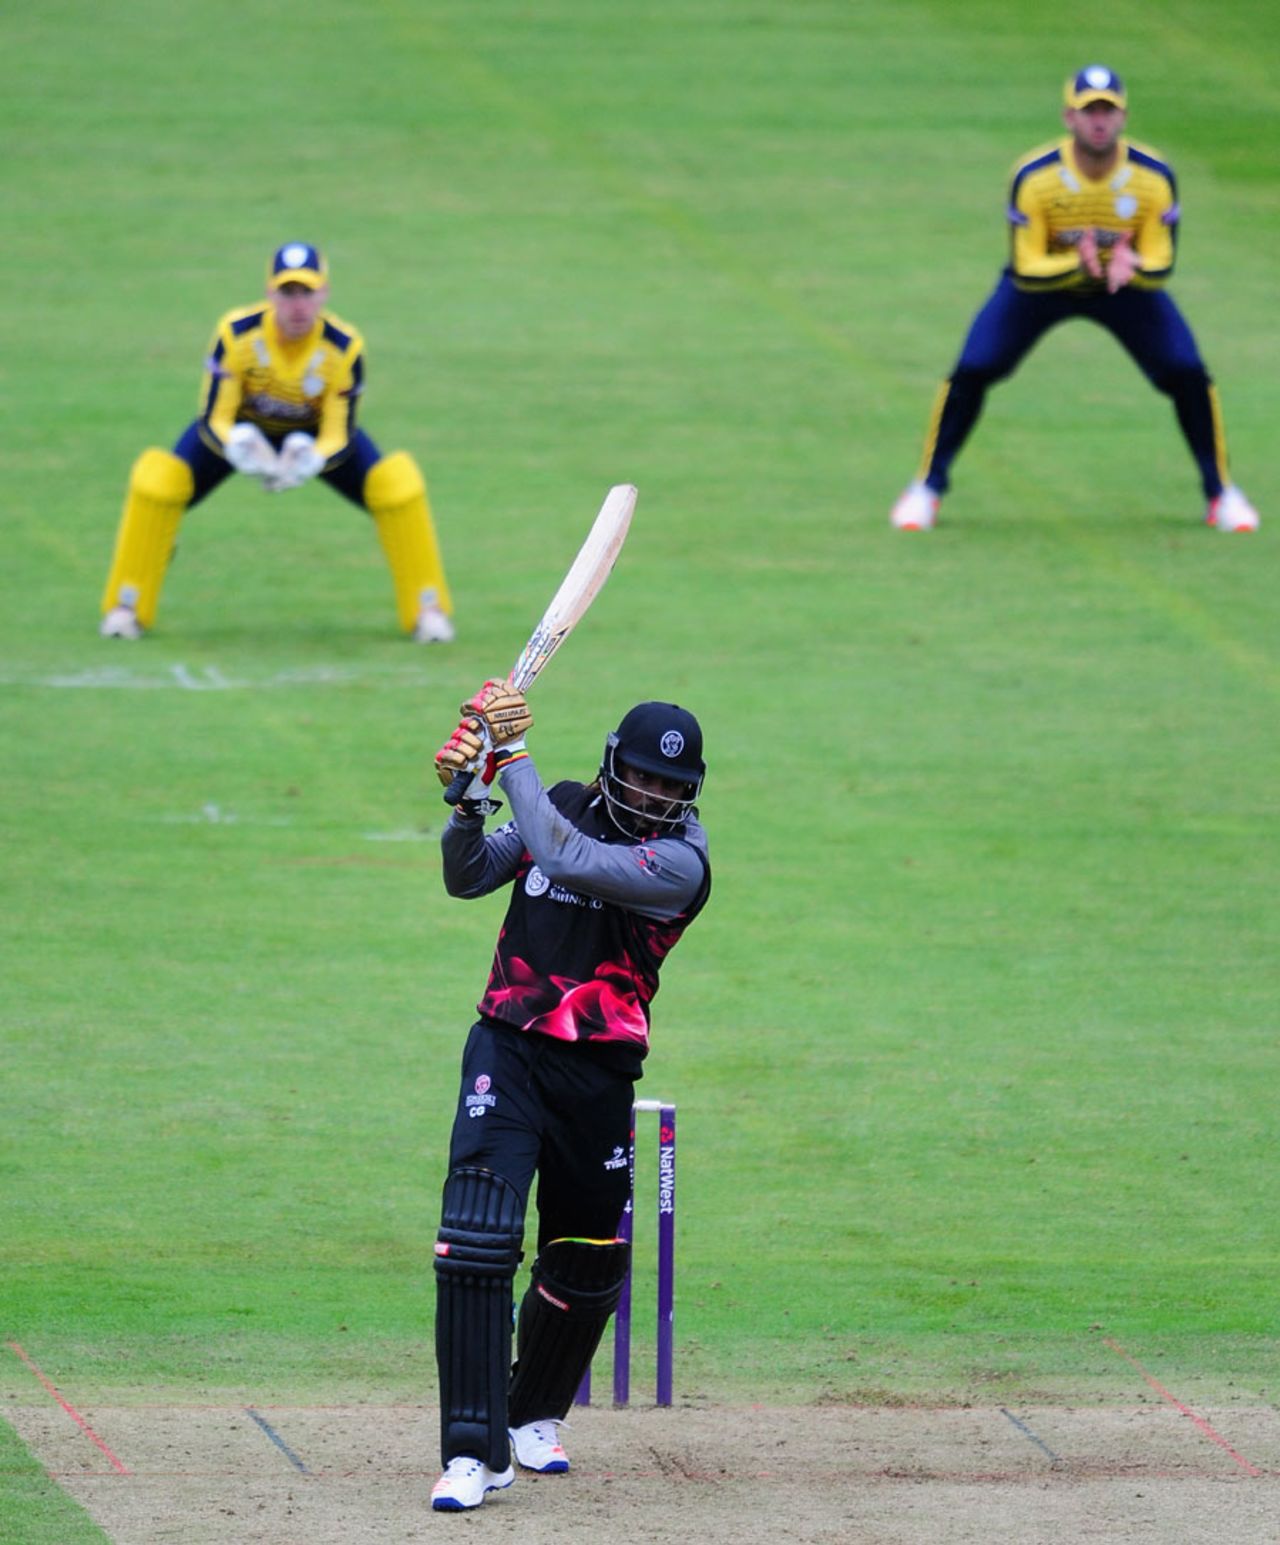 Chris Gayle smashed a half-century in his final appearance, Somerset v Hampshire, NatWest T20 Blast, South Group, June 19, 2016